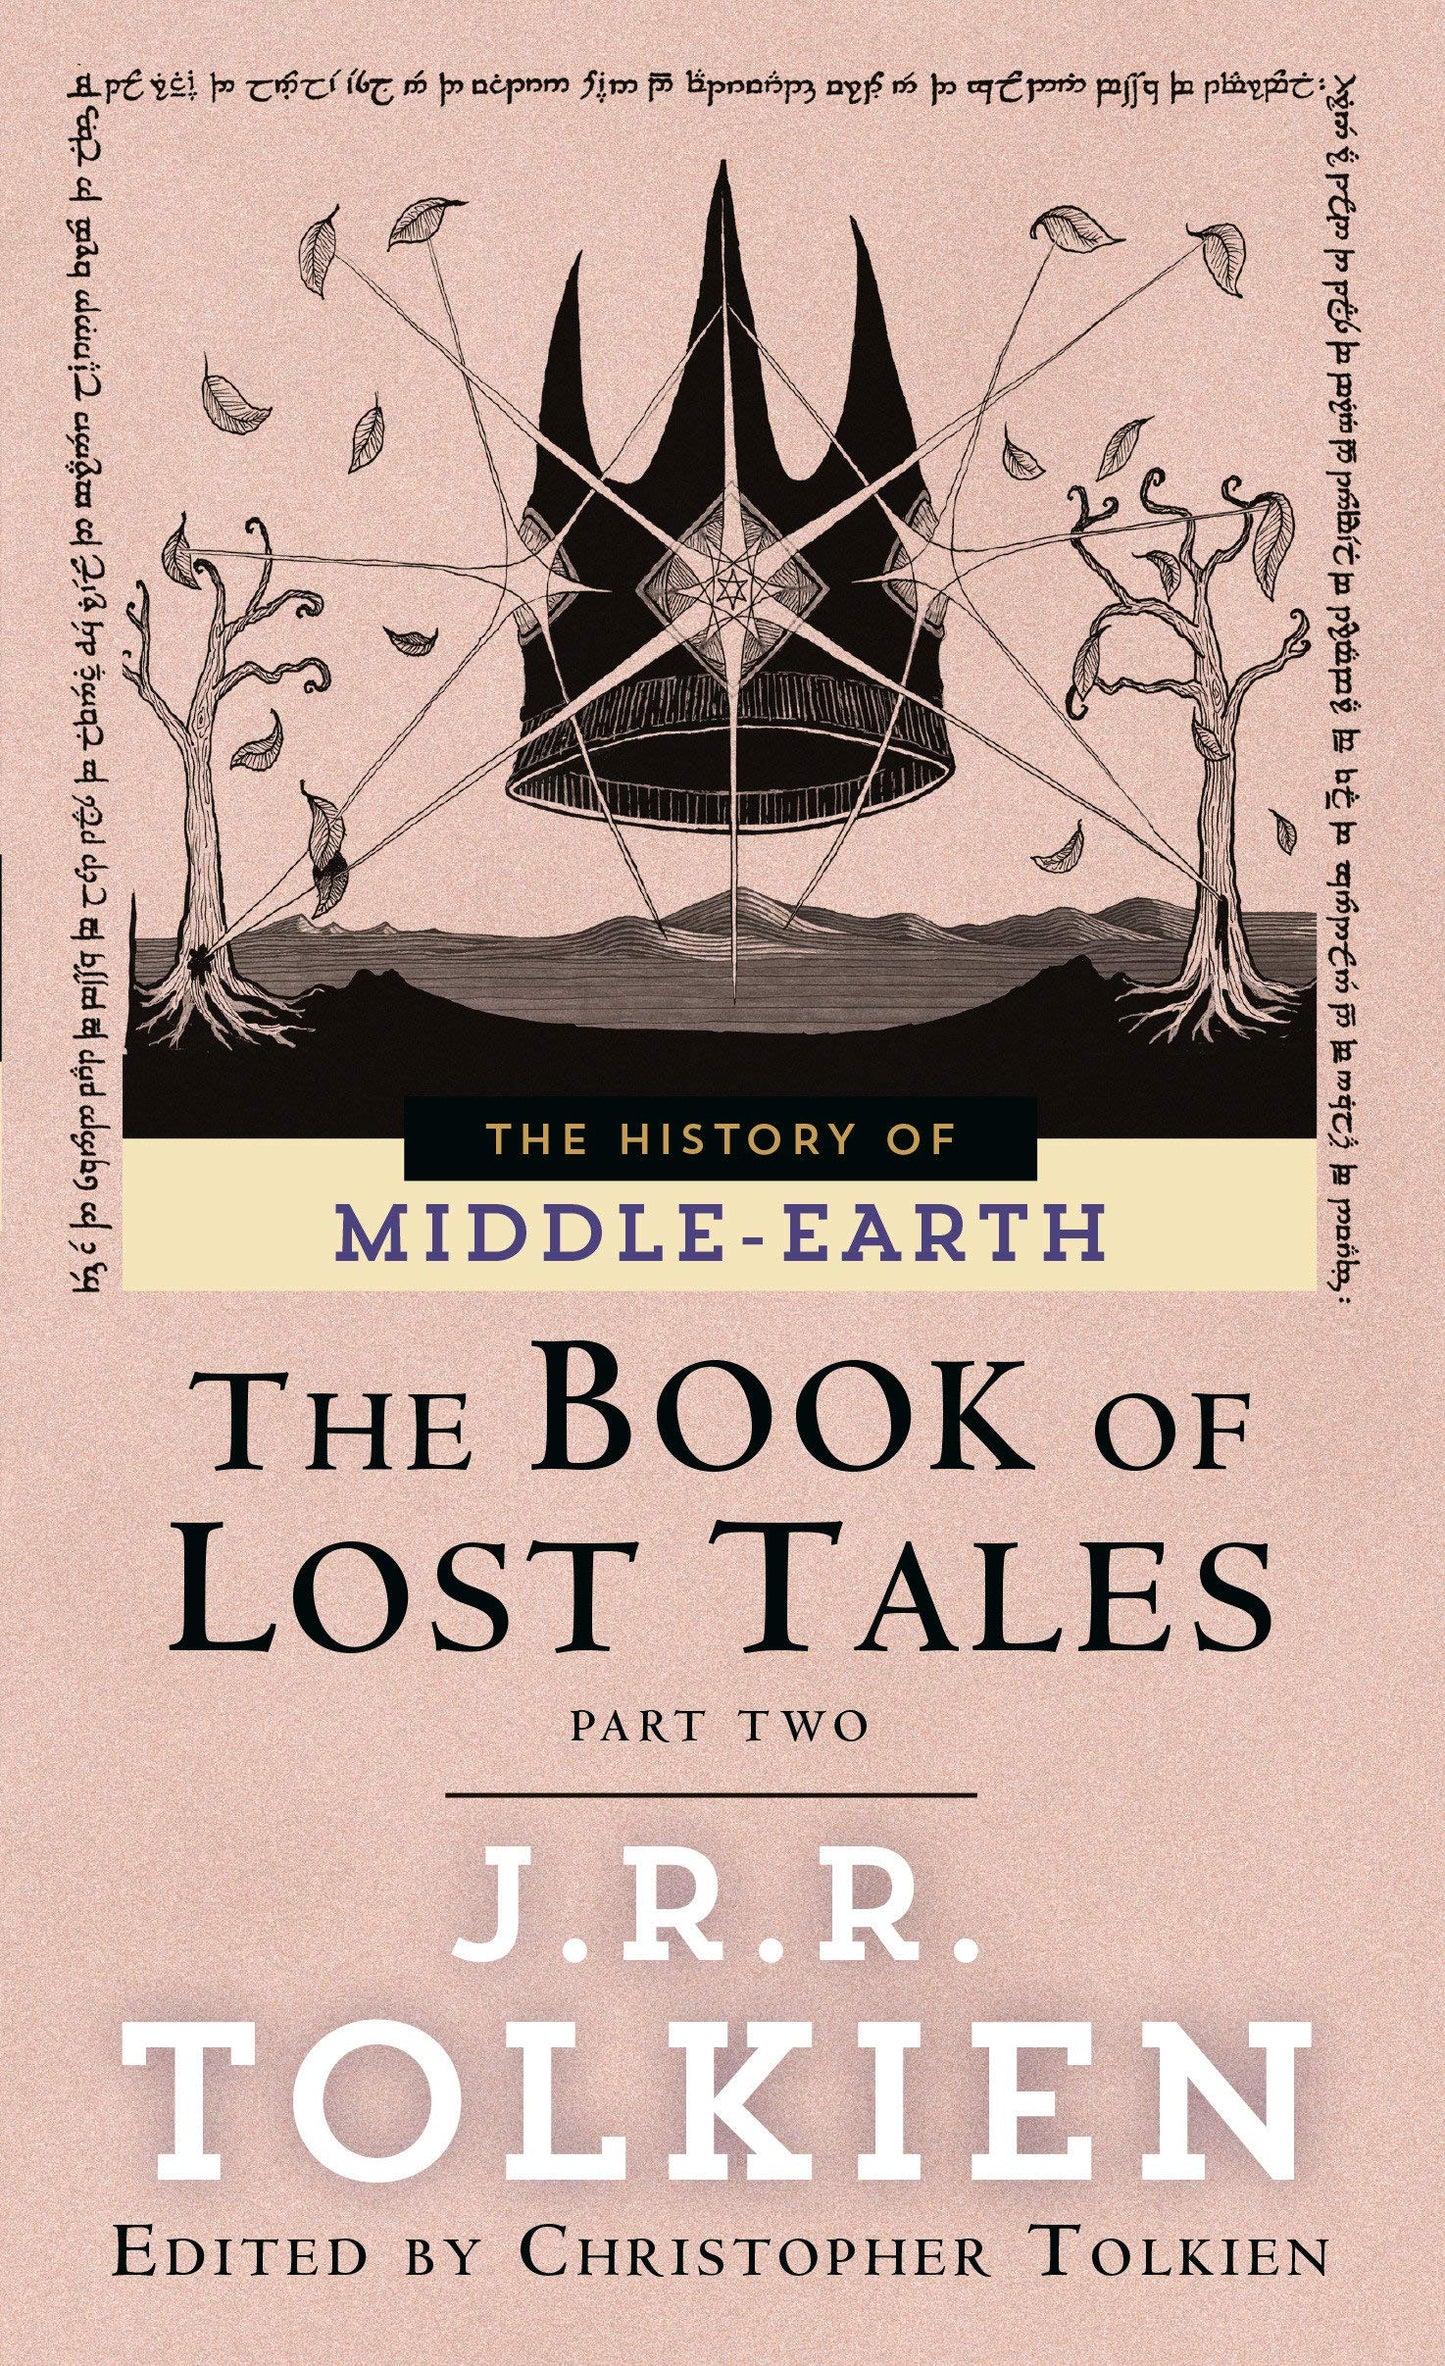 Book of Lost Tales: Part 2